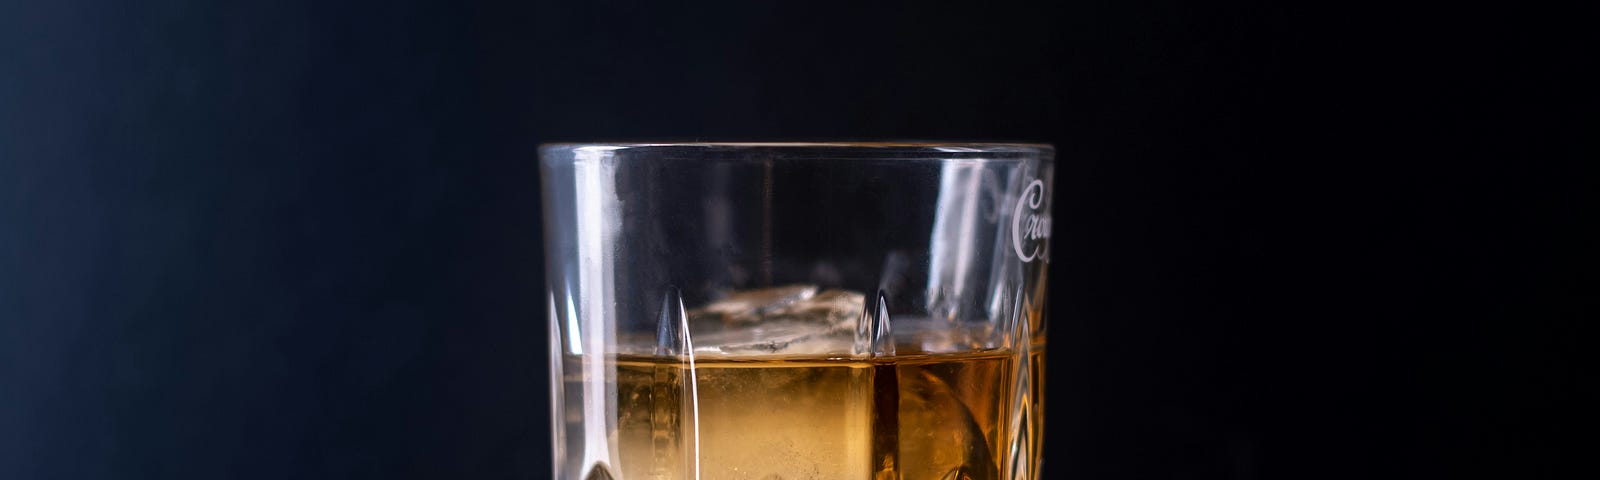 A glass of amber-colored scotch or whiskey sits on a reflective surface against a dark background. The liquor catches the light, revealing its transparent yet enticing nature, setting an ambiguous and somewhat ominous tone.